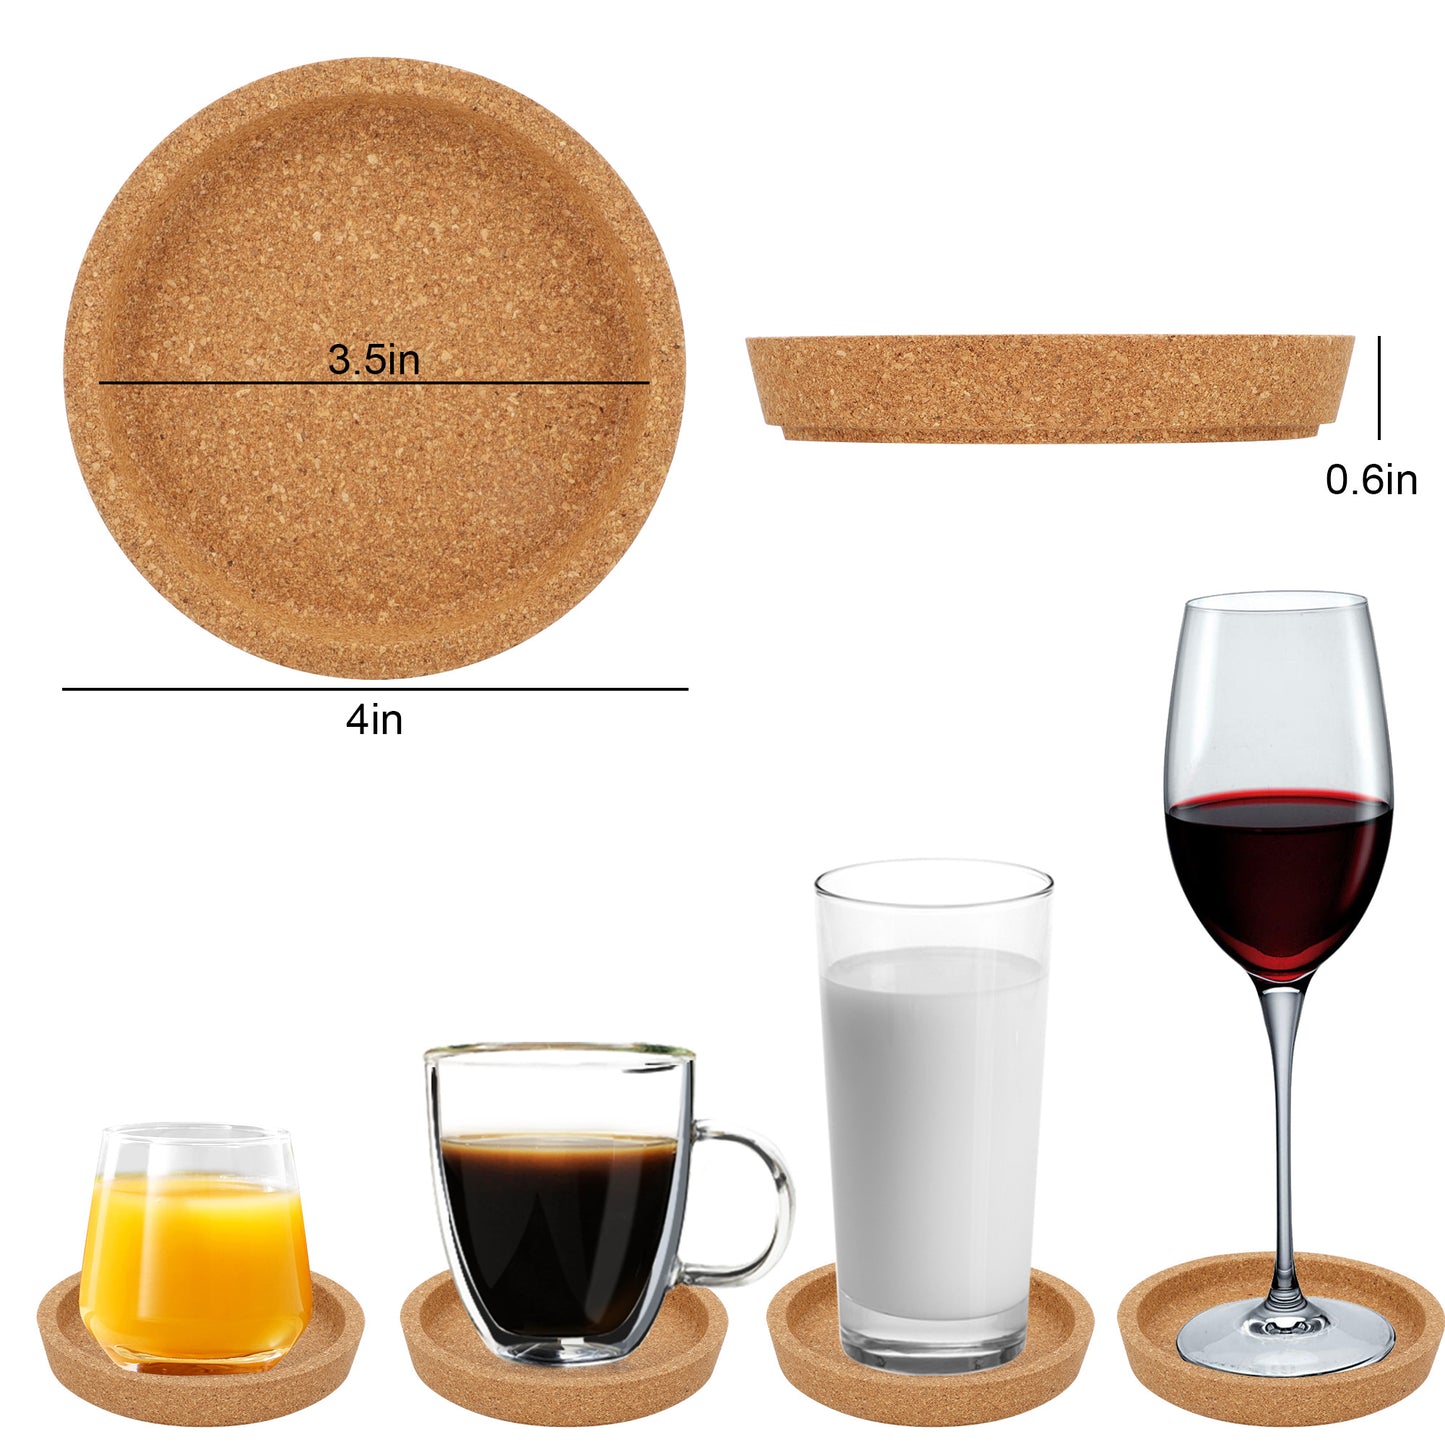 6pcs round cork coasters - Non-Slip, Universal Fit, Easy to Clean - Protects Tabletops from Drink Rings and Spills